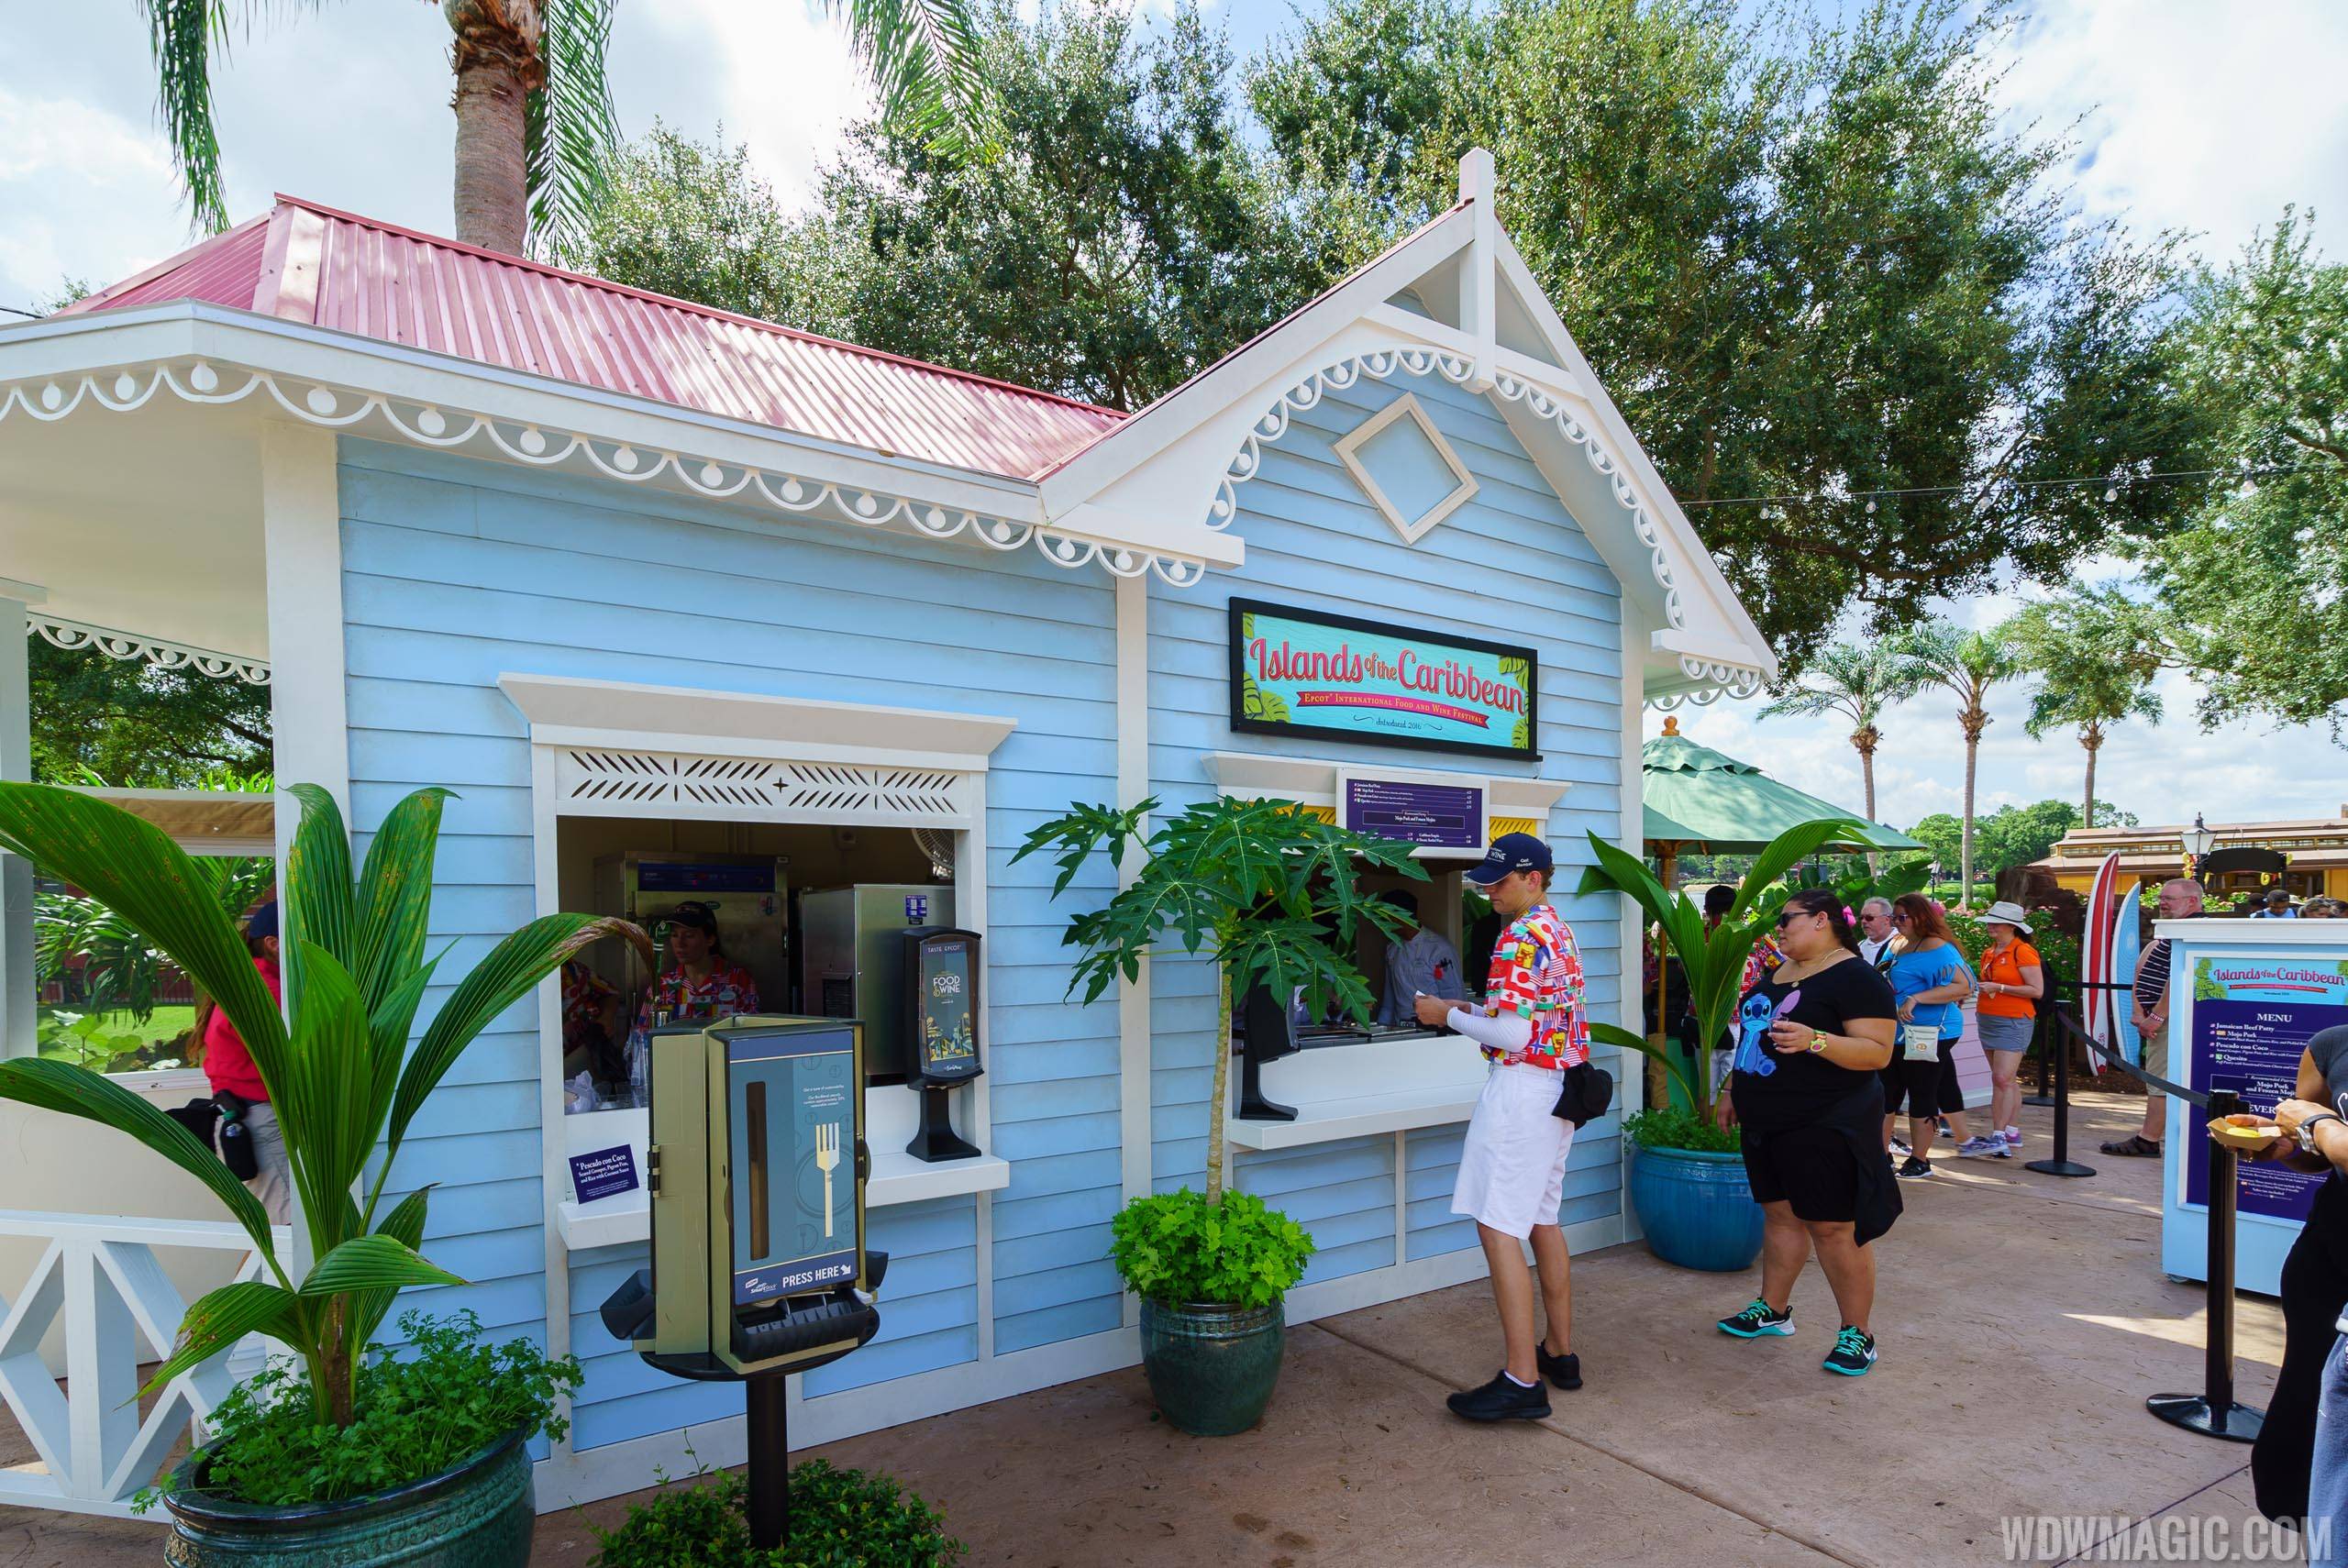 2016 Epcot Food and Wine Festival - Islands of the Caribbean kiosk